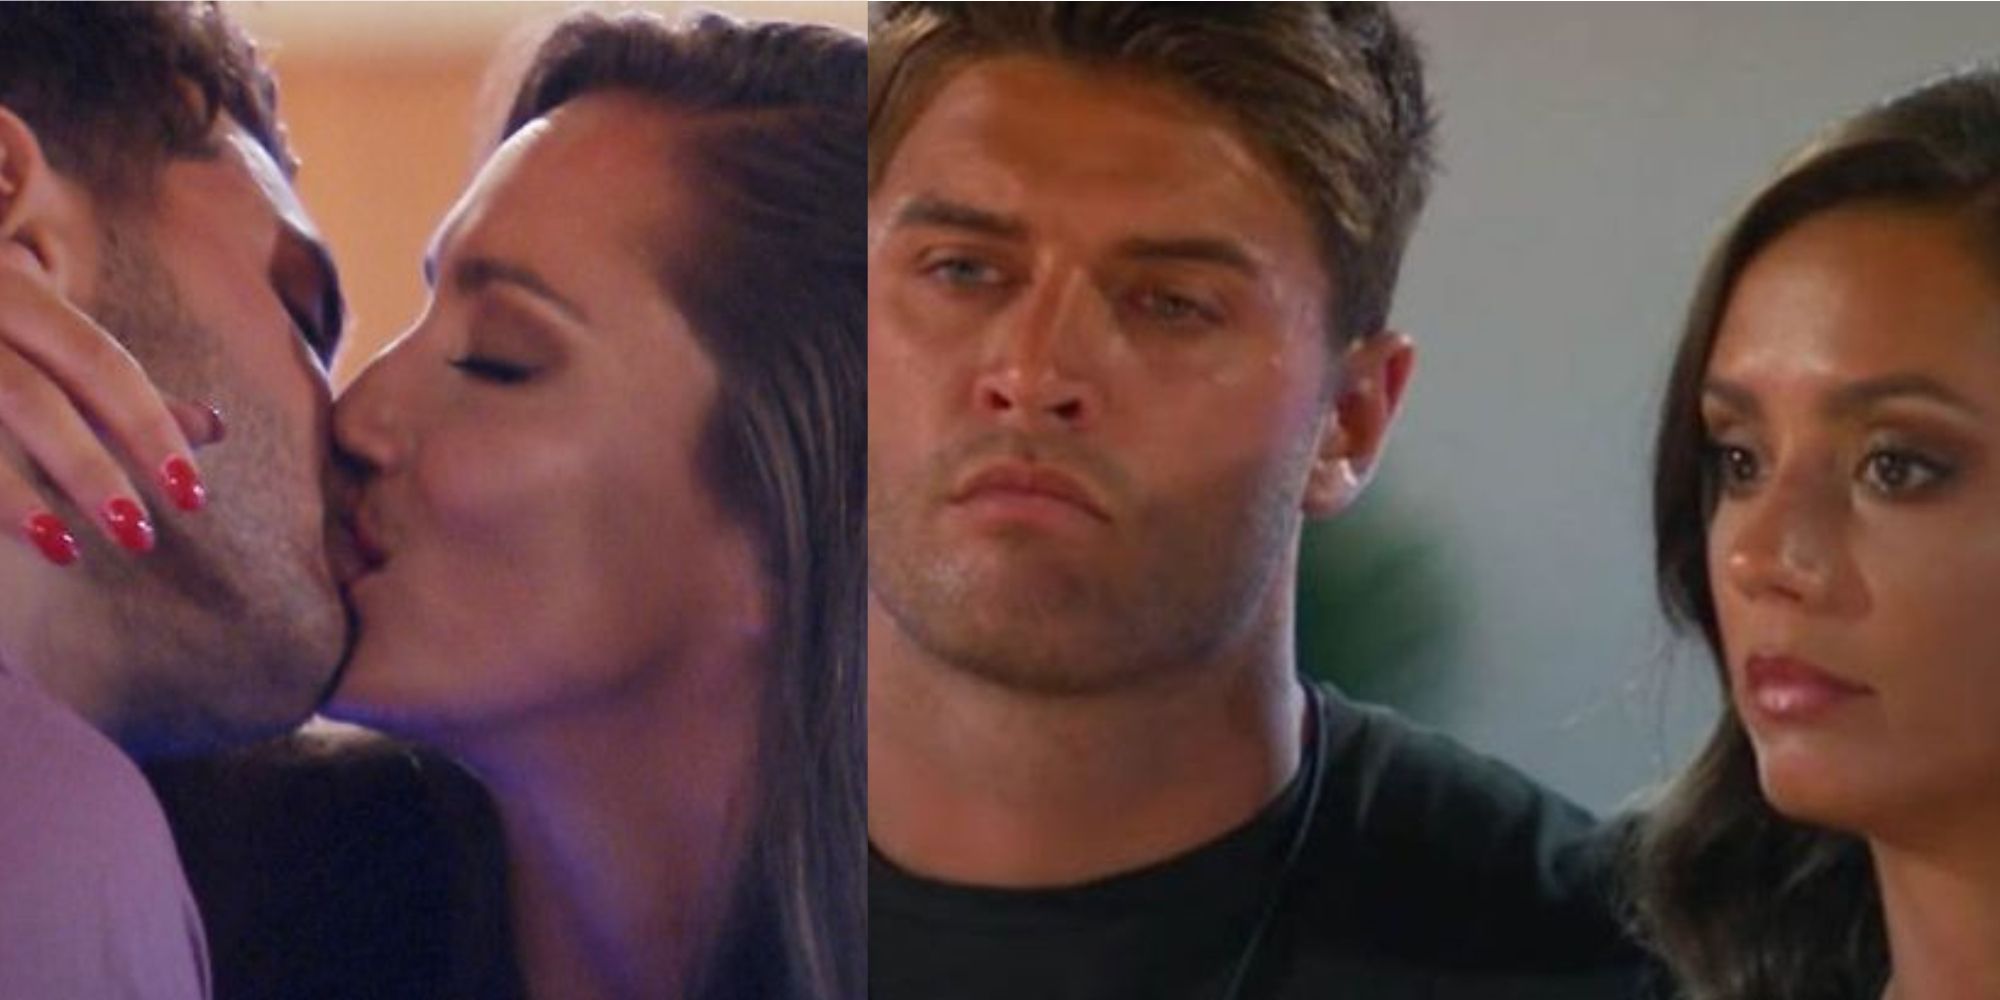 Love Island UK Season 3: Which Couples Are Still Together (And